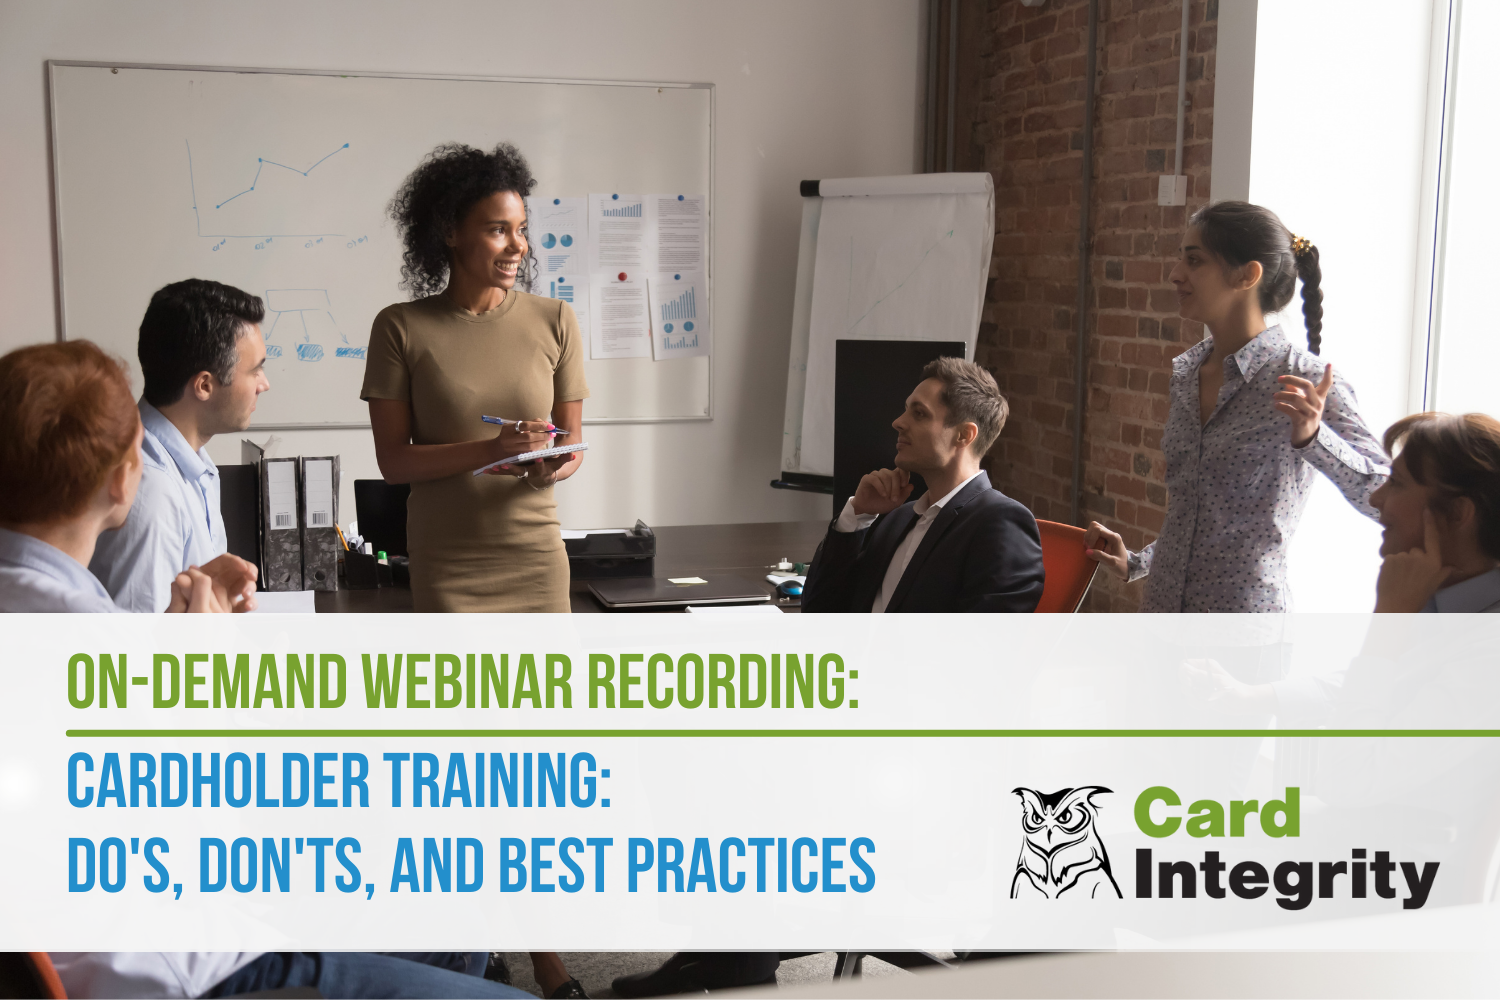 Cardholder Training: Do’s, Don’ts, and Best Practices